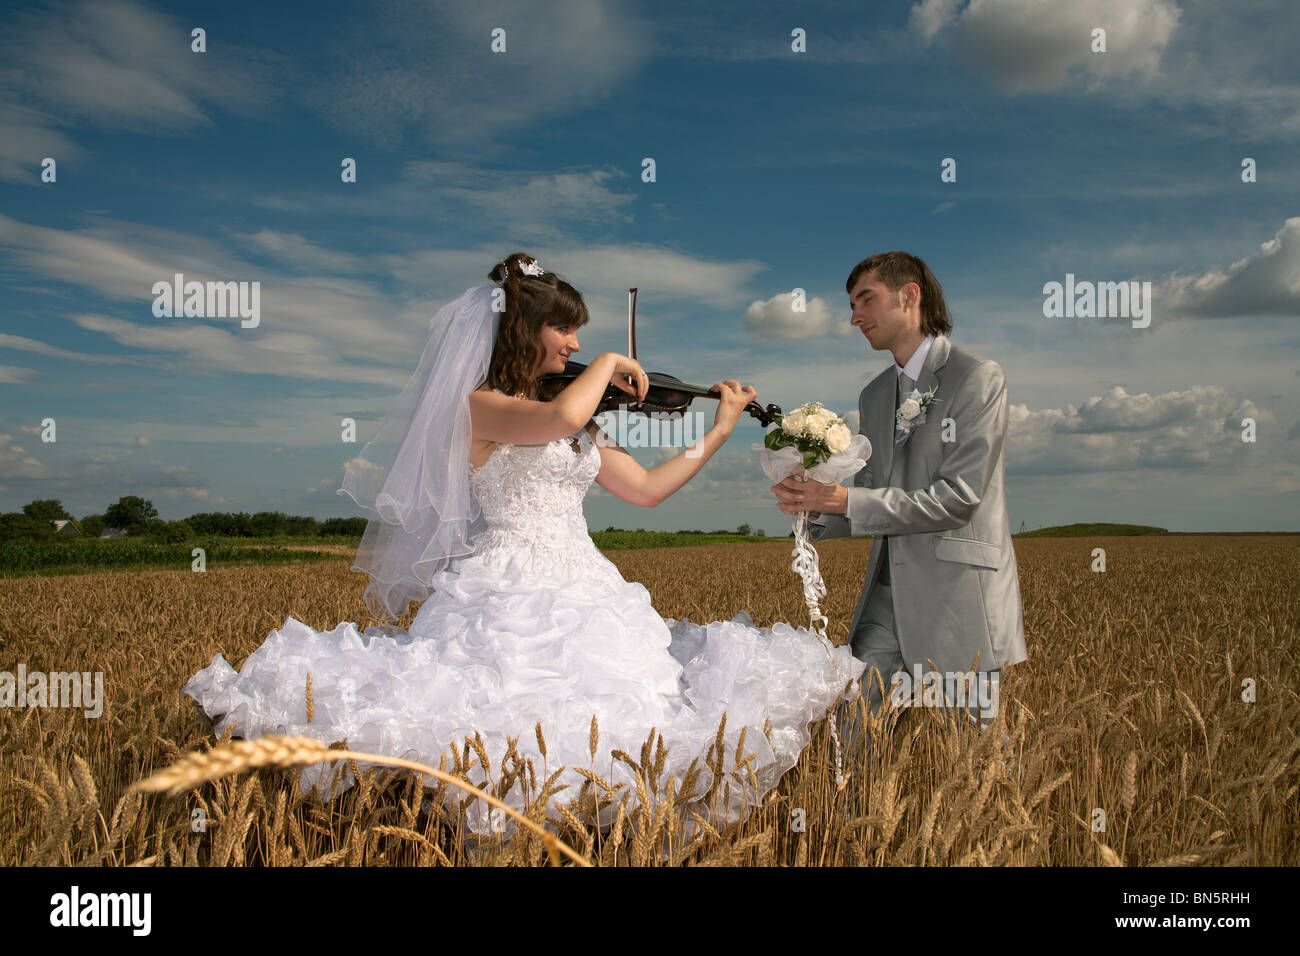 Romantic declaration of love under sounds of a violin Stock Photo